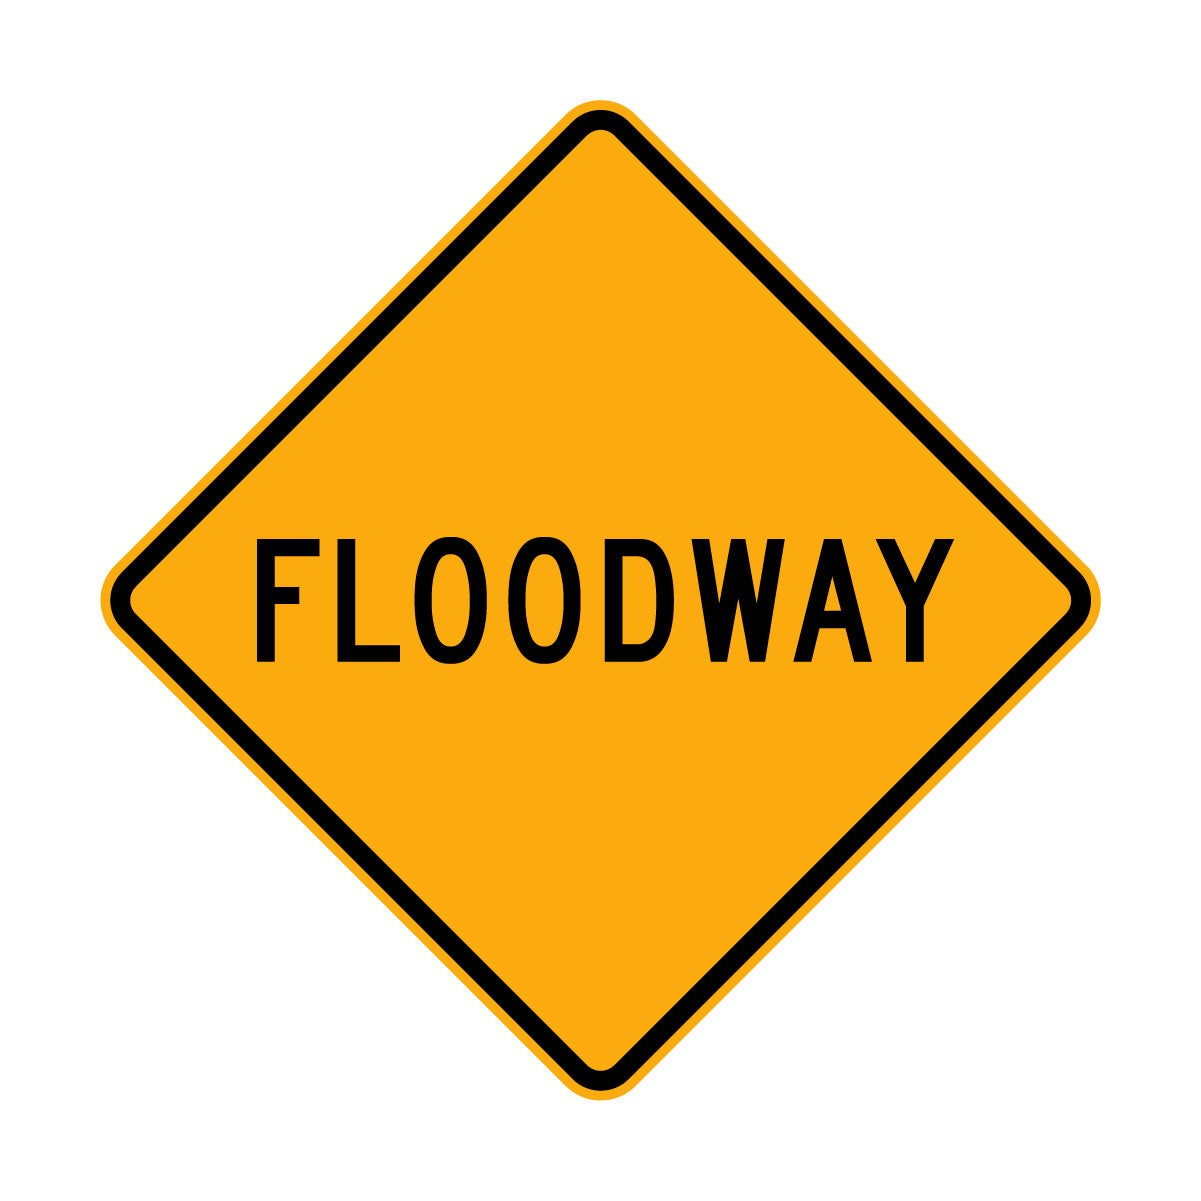 Warning: Floodway Sign